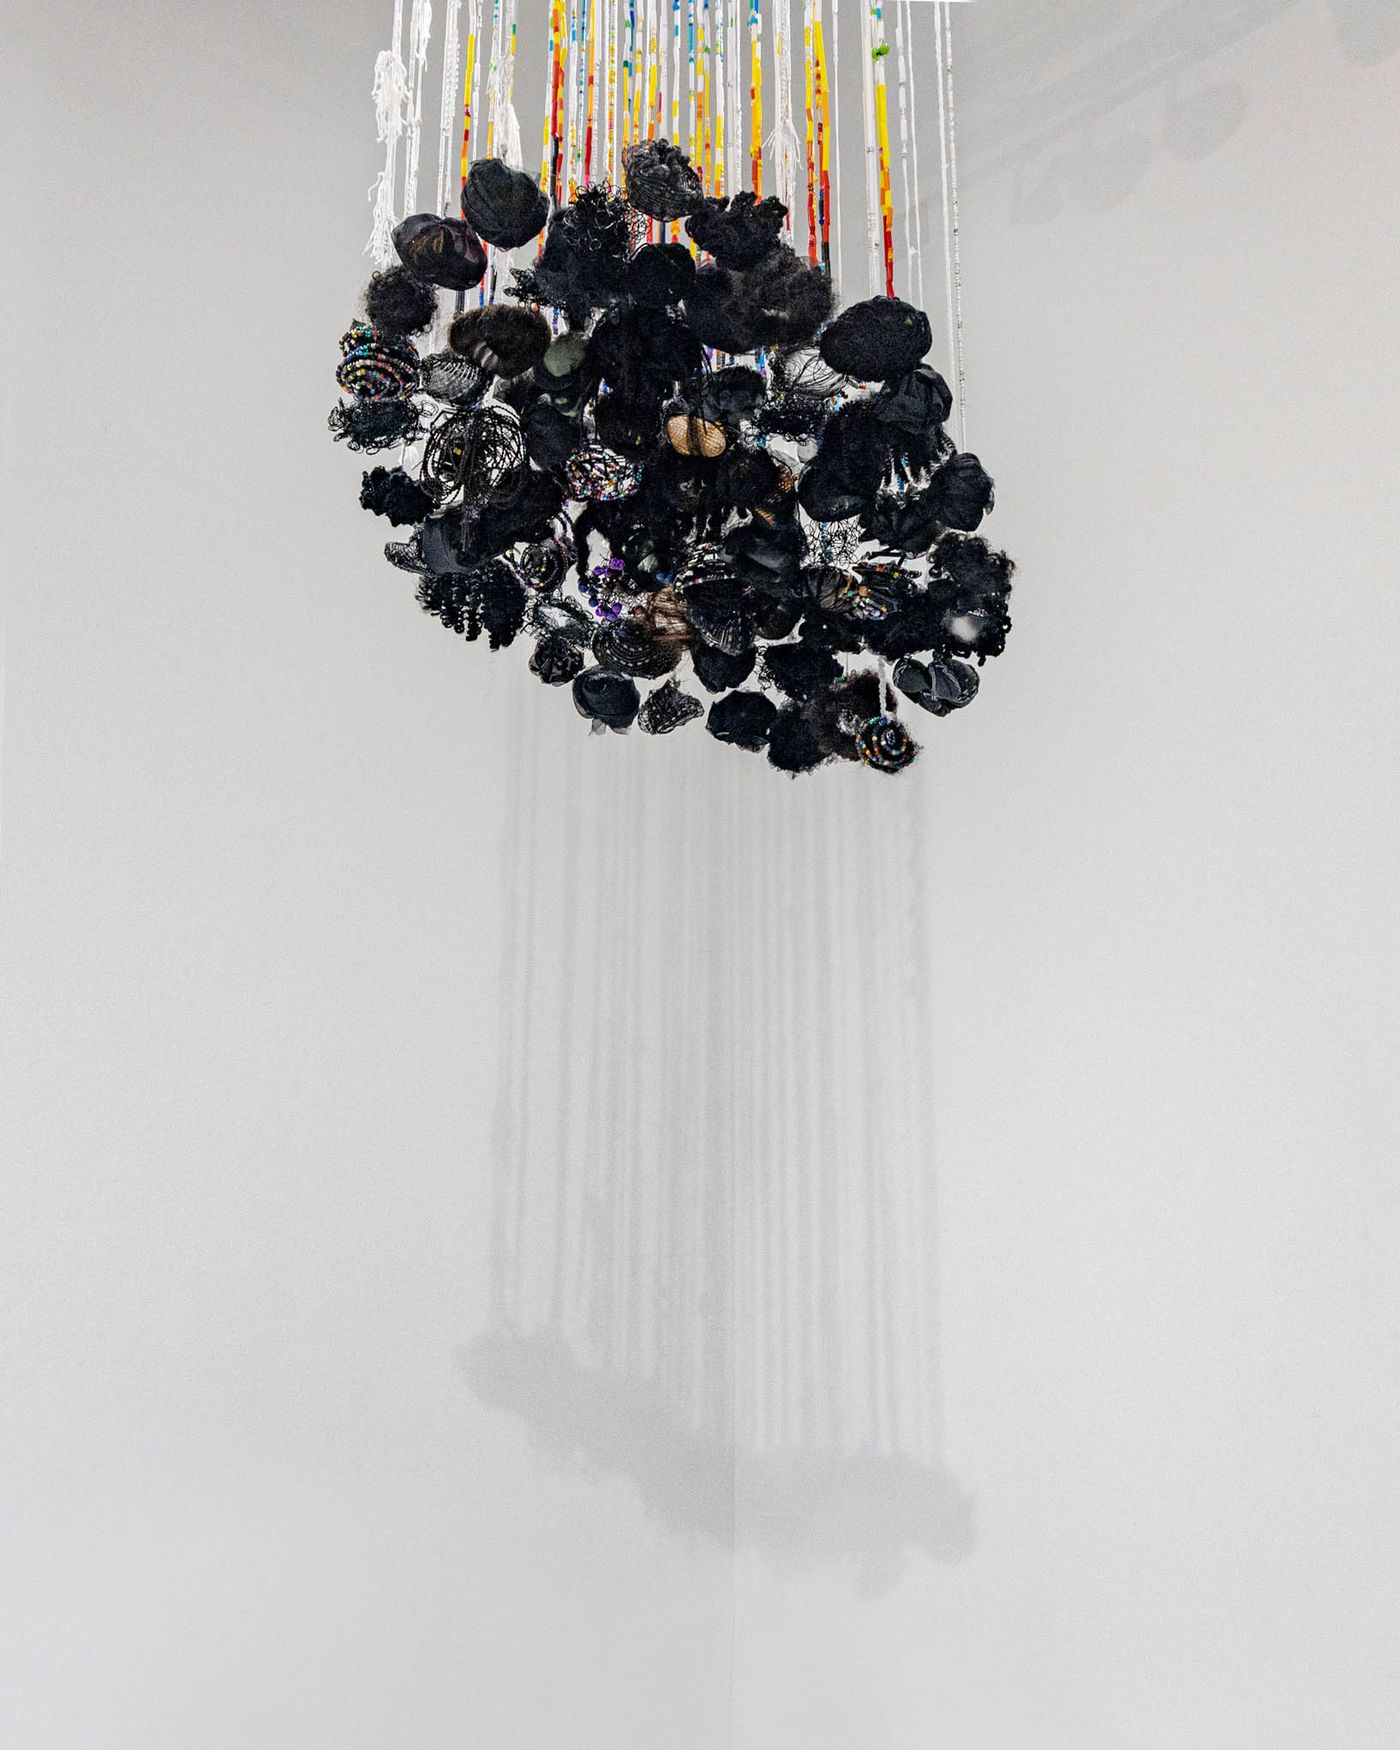 Untitled (detail), 2022. Mixed media; 216 x 40 x 40 in. Photo: Meghan Olson.